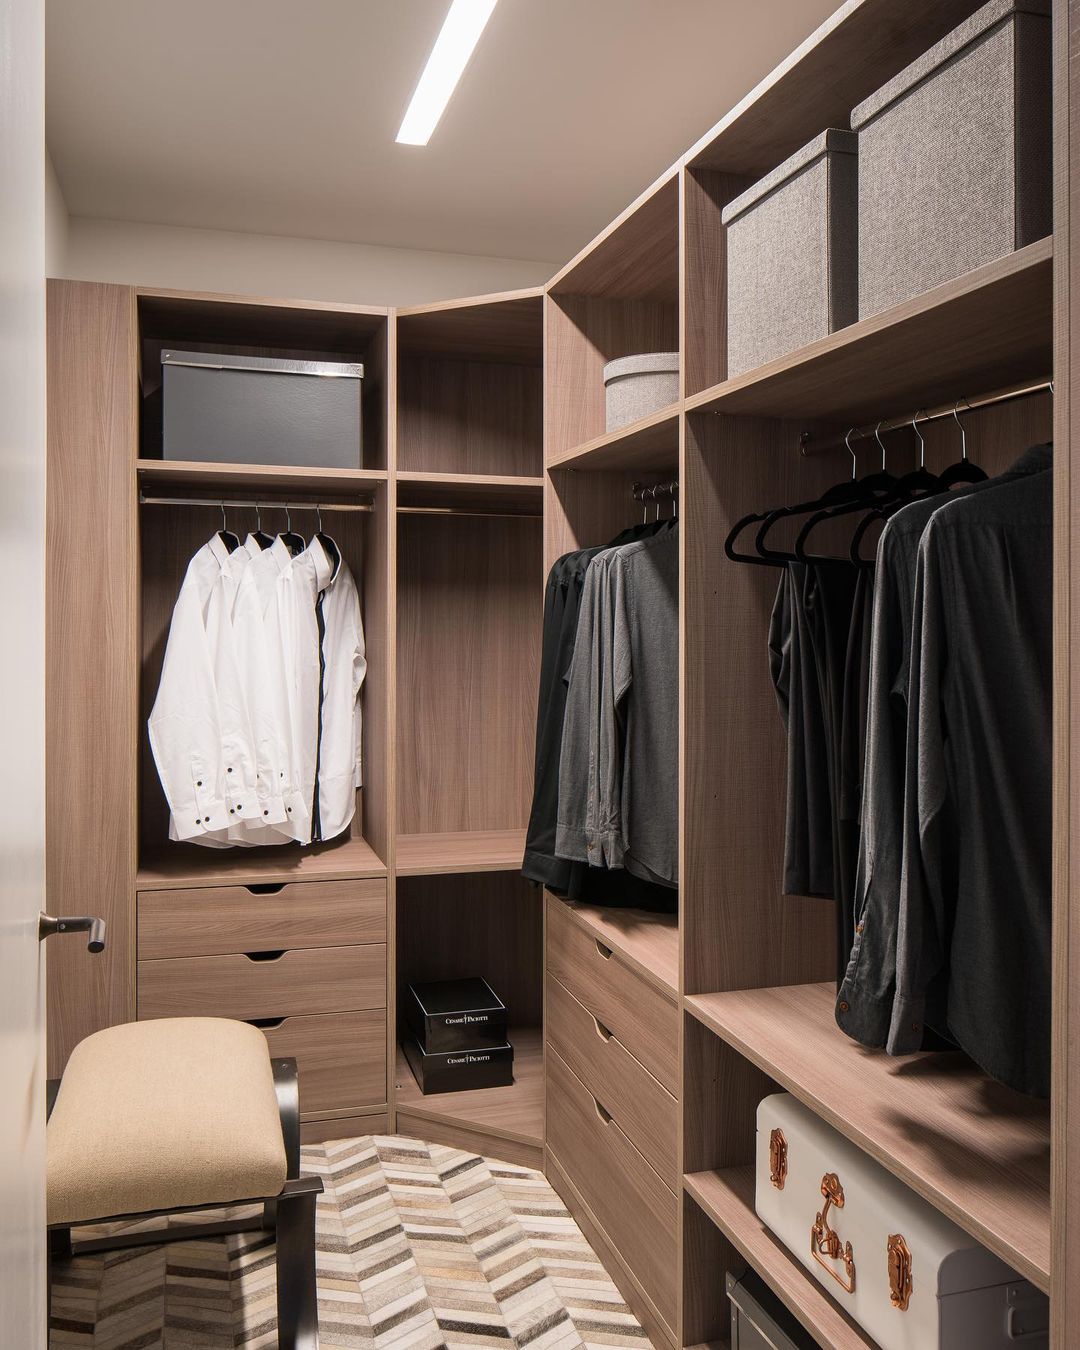 Large Walk-In Closet in an Apartment. Photo by Instagram user @livetenthousand